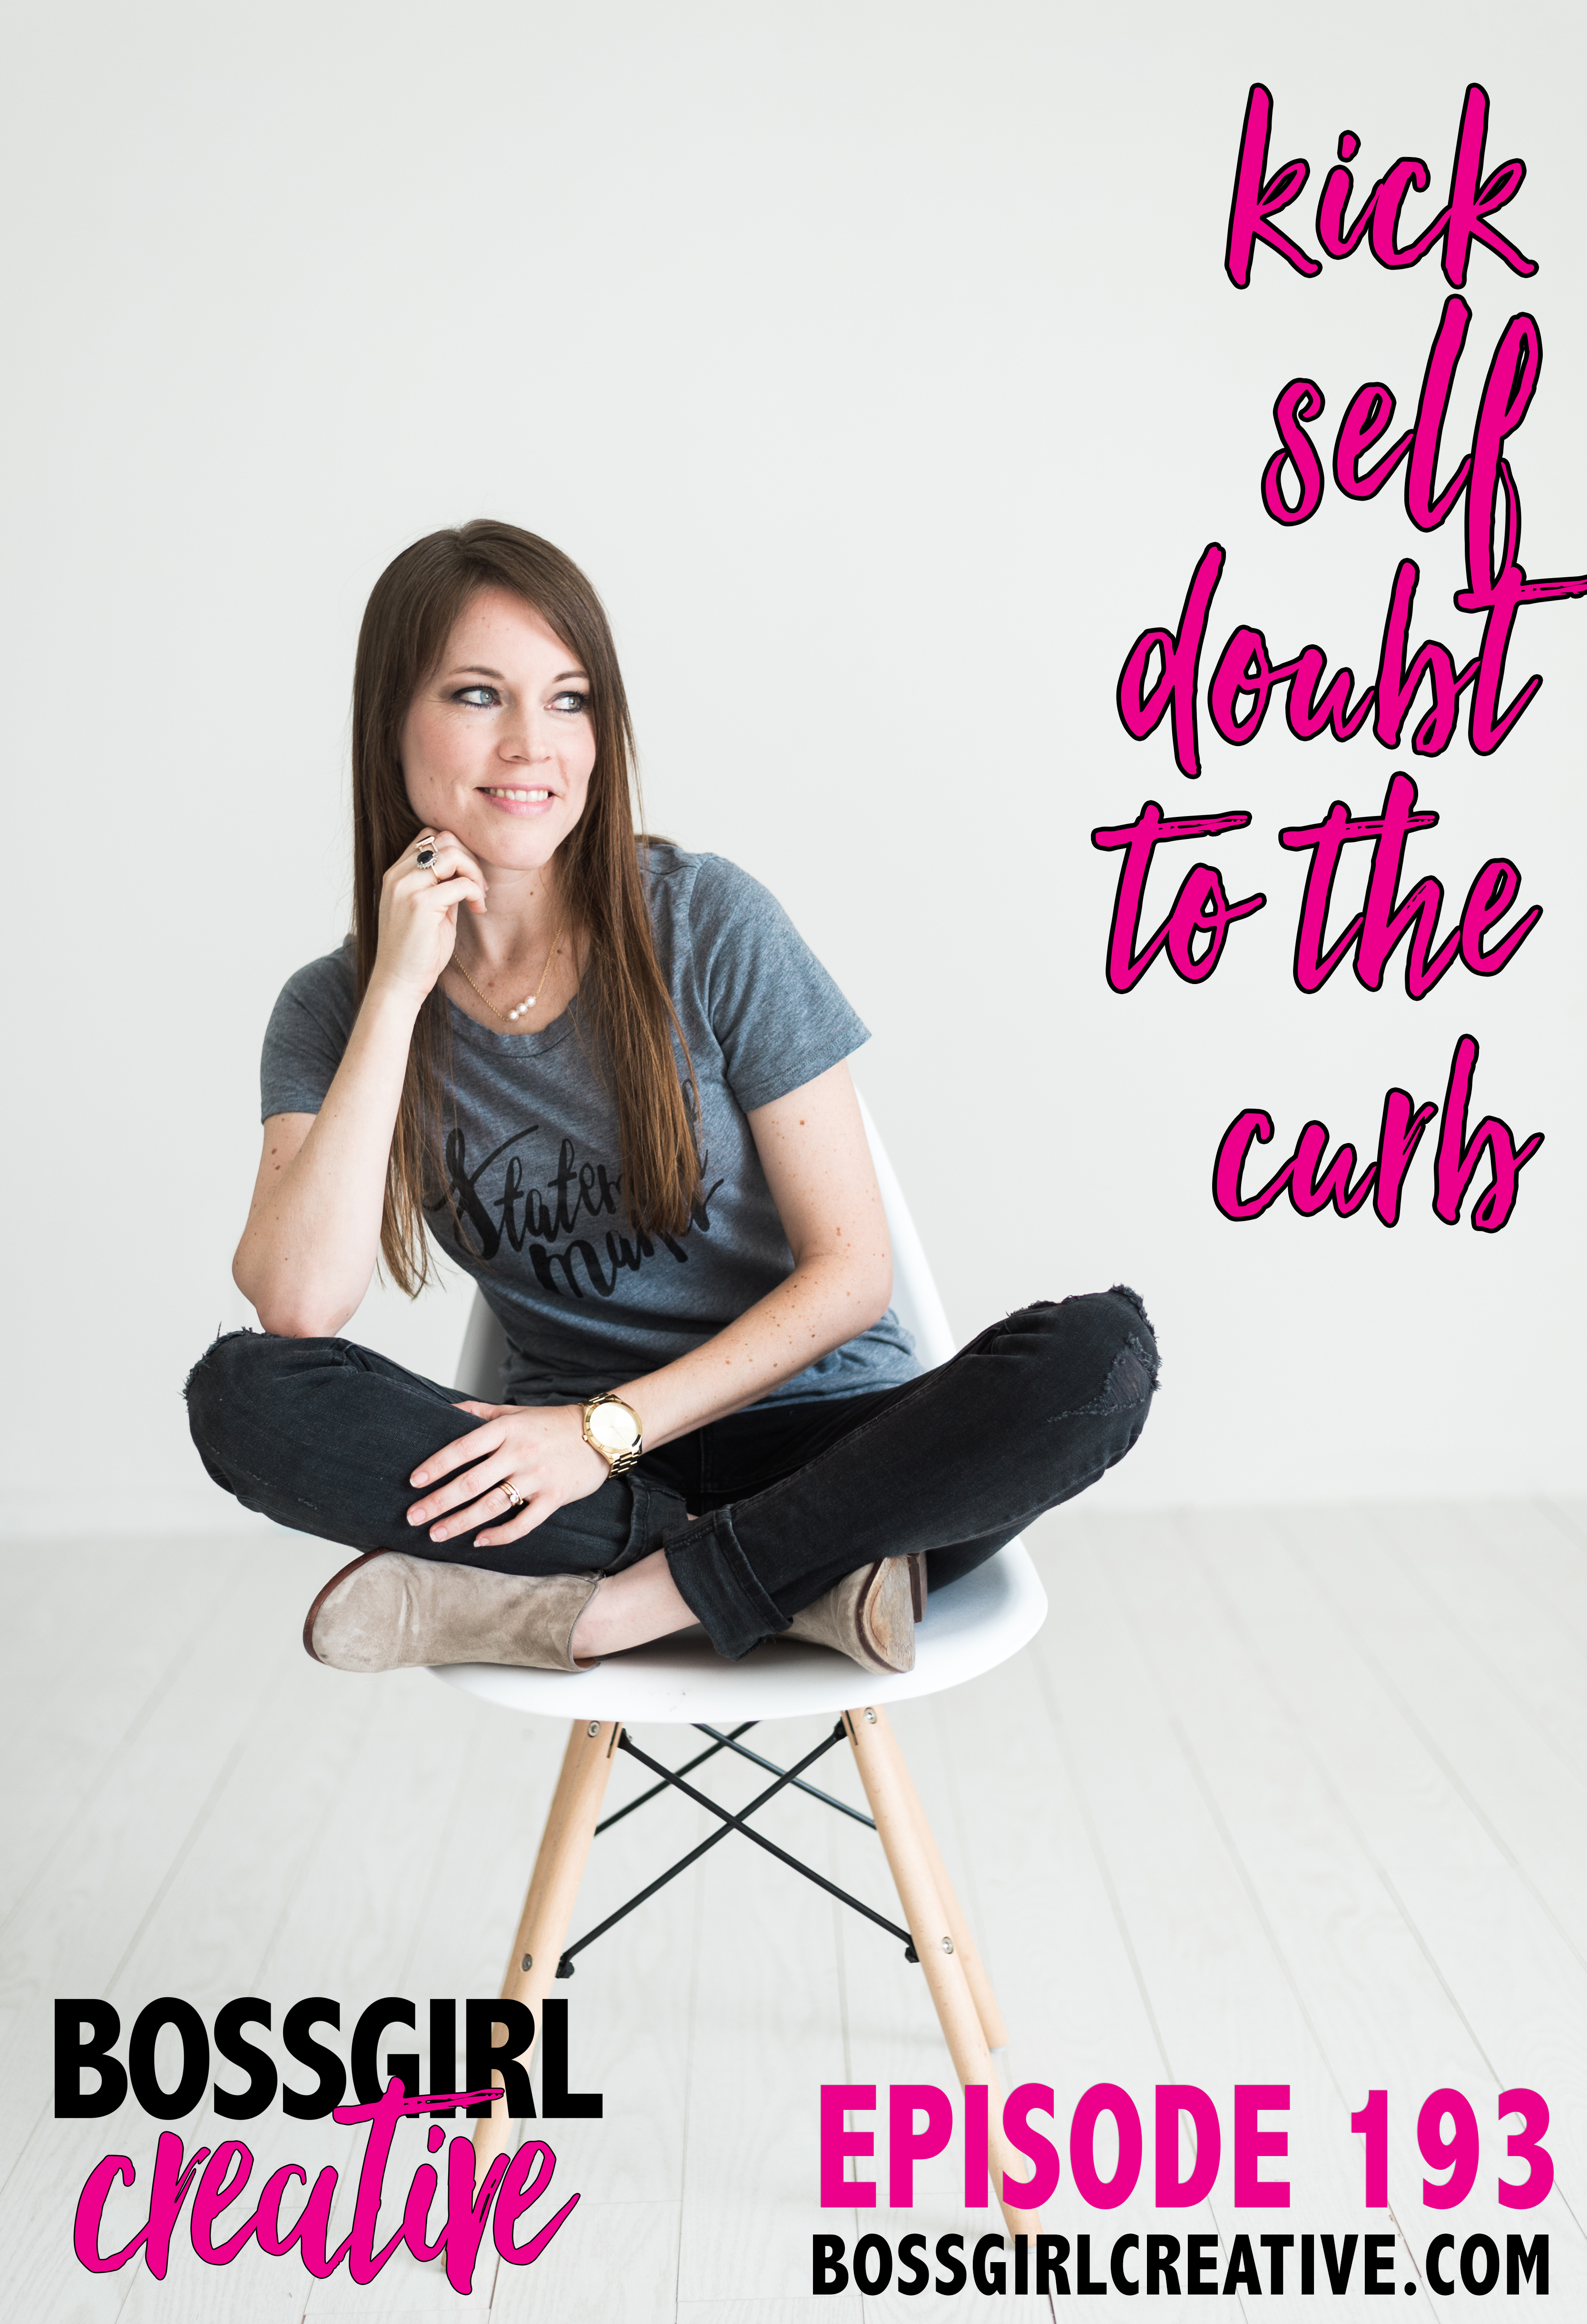 It's time to kick that self-doubt to the curb! Take a listen to this episode to find out how! #BOSSGIRLCREATIVE Episode 193